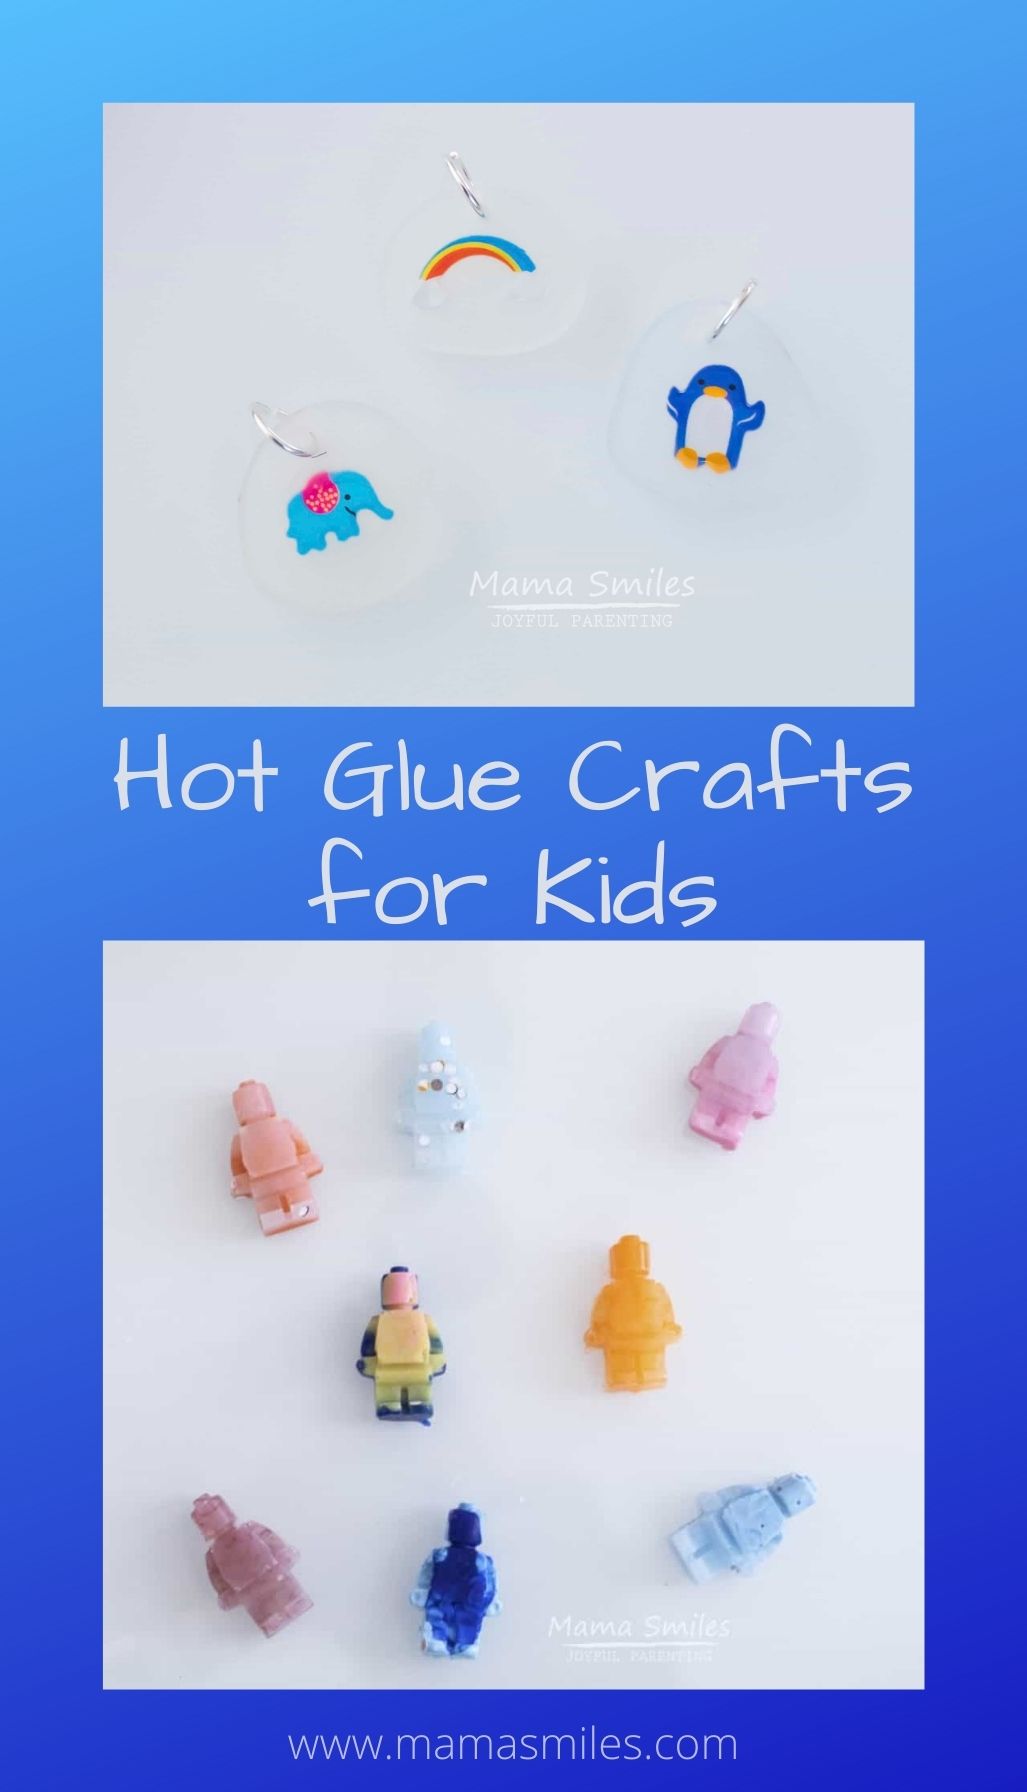 Two Cool Hot Glue Projects to Wow the Kids - Mama Smiles - Joyful Parenting